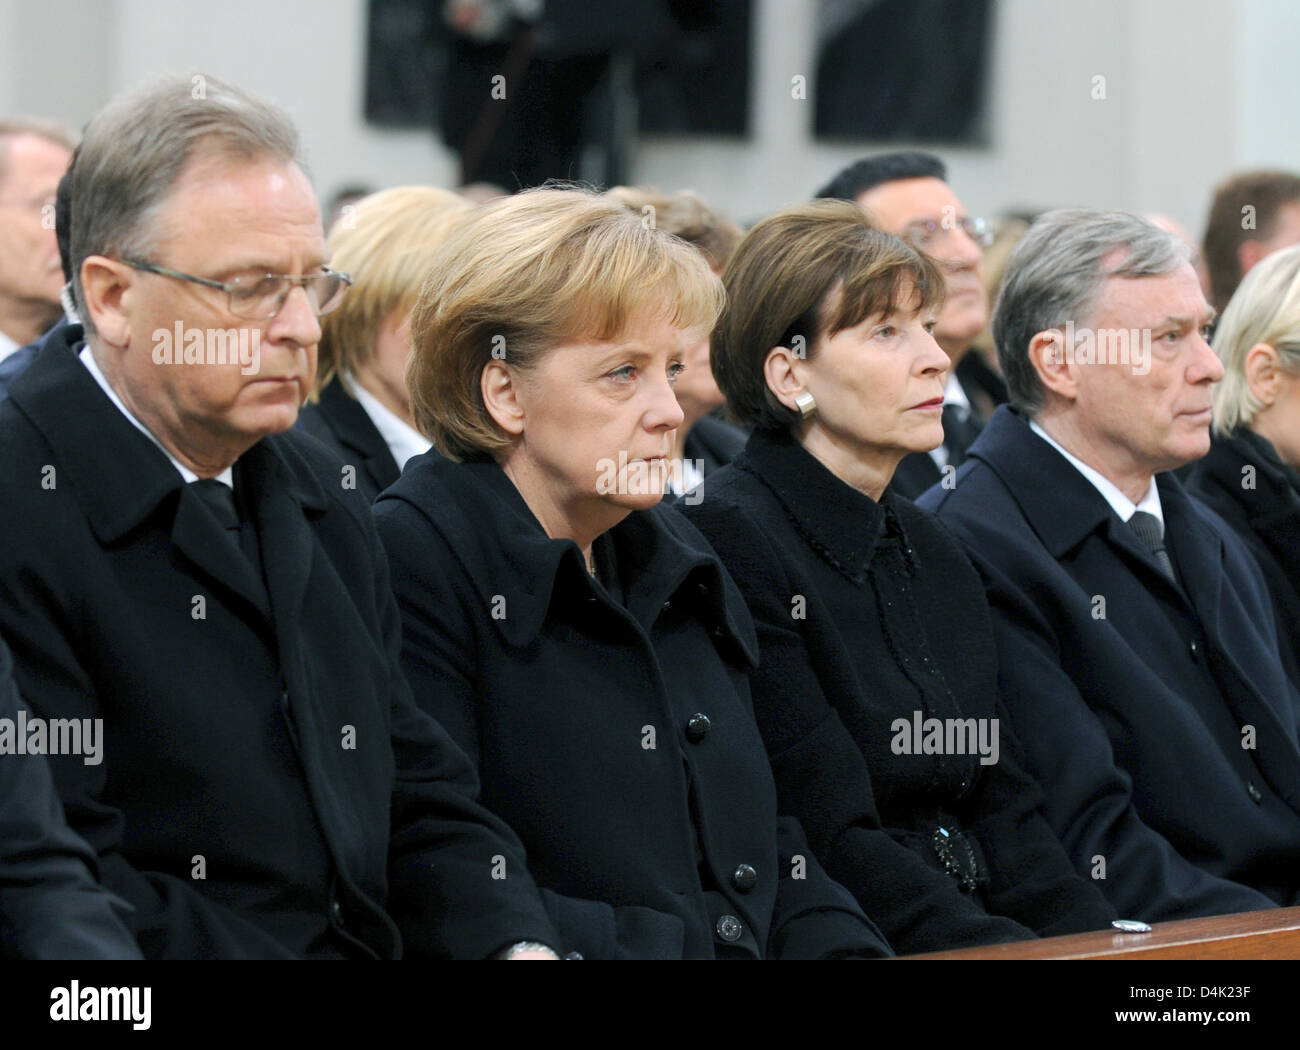 (R-L) German President Horst Koehler, his wife Frau Eva Luise, German Chancellor Angela Merkel and the President of the Federal Constitutional Court, Hans-Juergen Papier attend the official memorial service at St. Karl Borromaeus Church in Winnenden, Germany, 21 March 2009. Mourners commemorated the 15 vicitims killed during the rampage shooting at secondary school ?Albertville? in Stock Photo